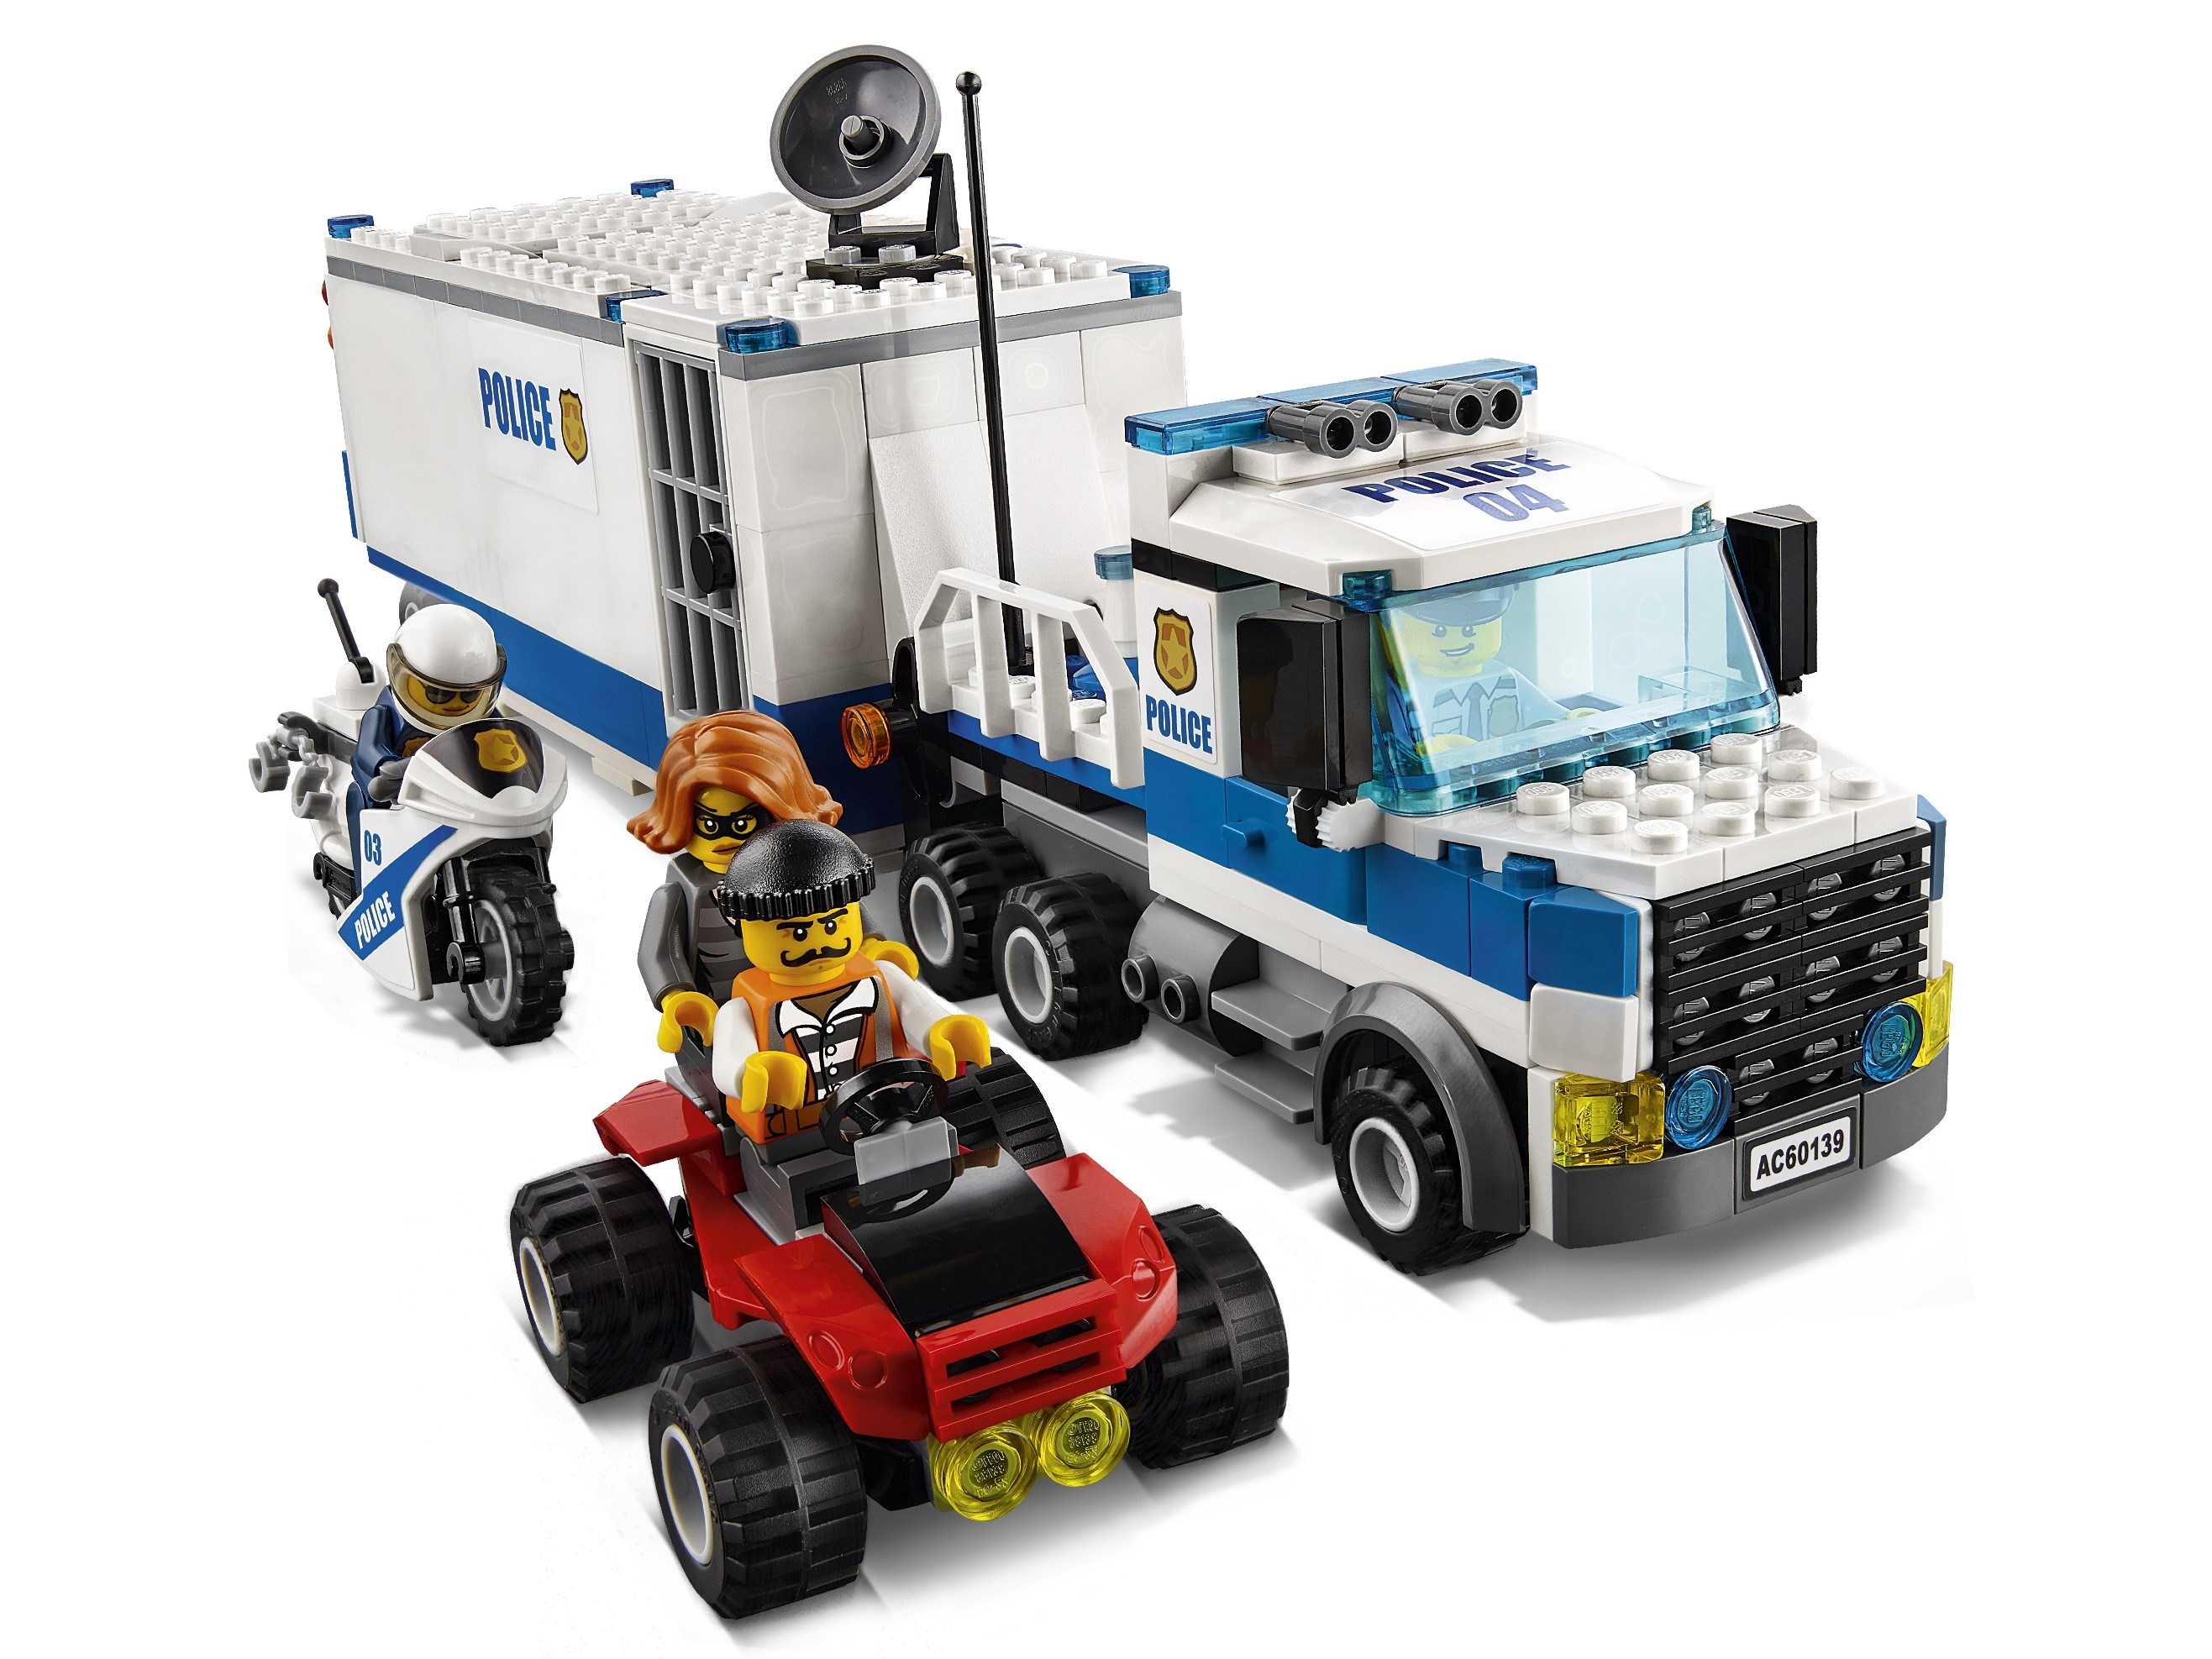 LEGO City Police Mobile Command Center 60139 Building Toy Kids Cons 374 Pieces